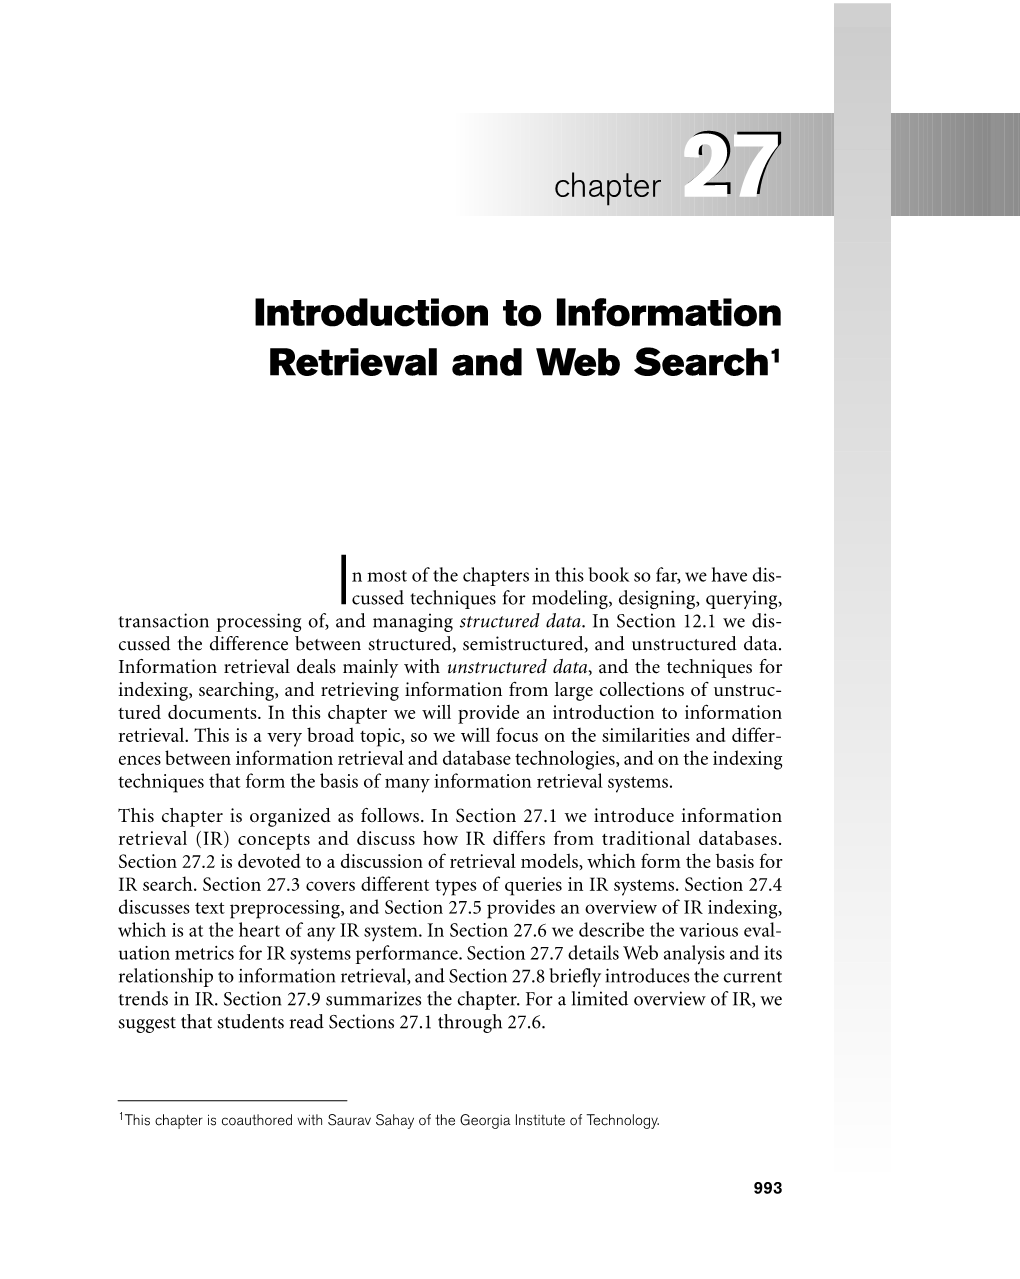 Introduction to Information Retrieval and Web Search1